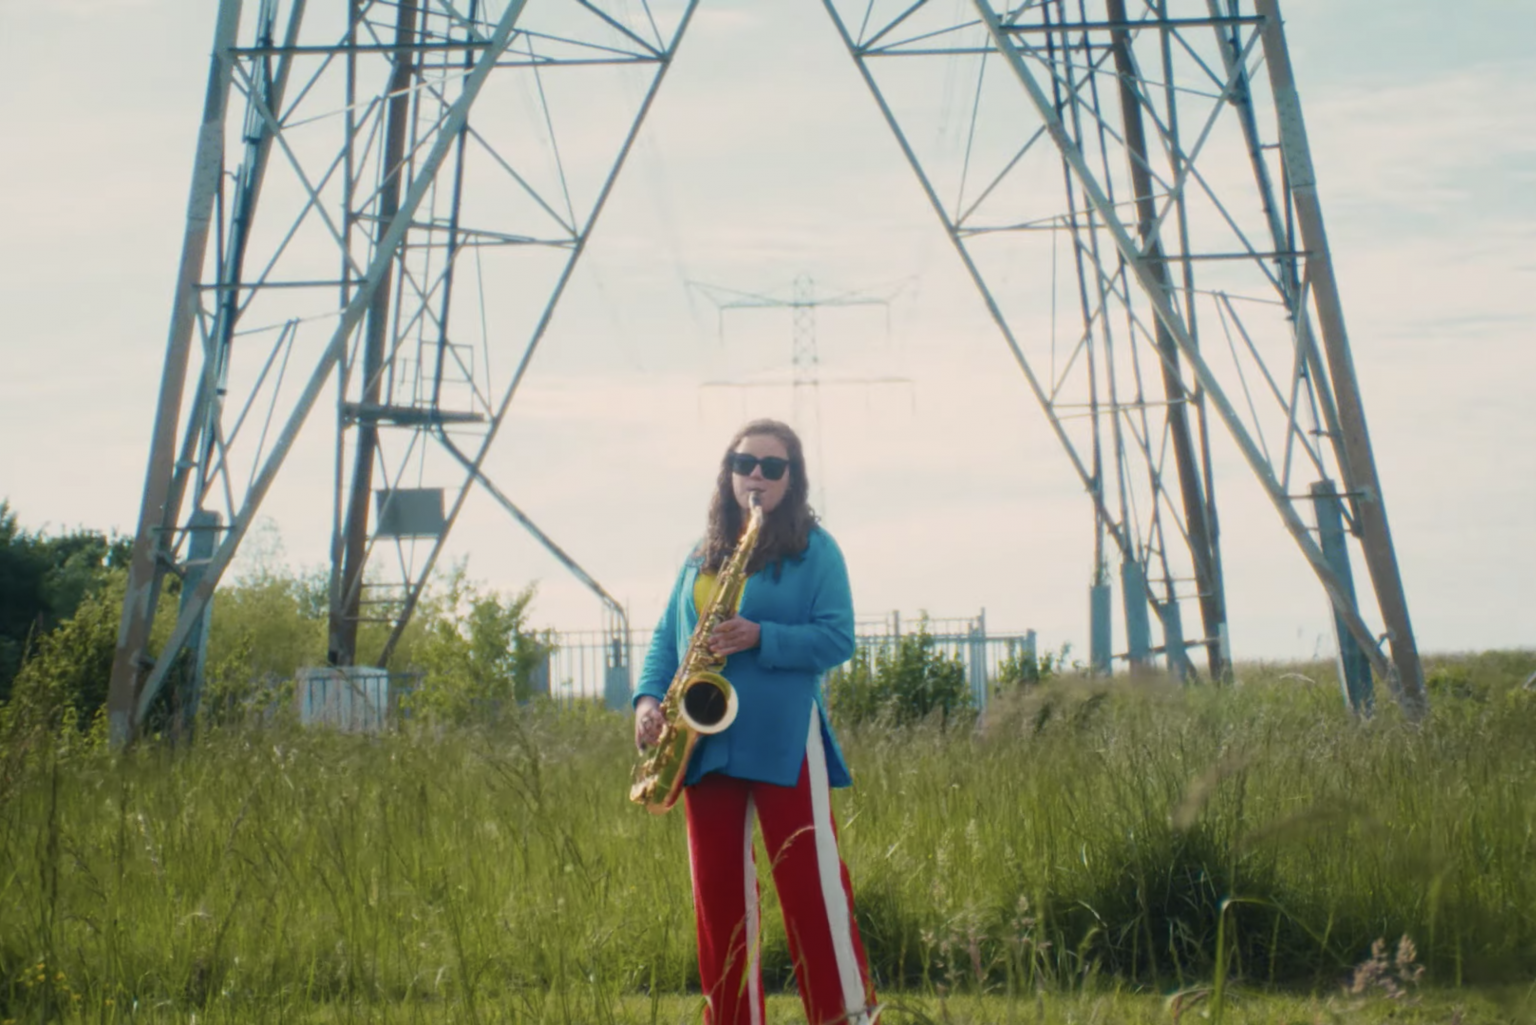 Still from 'Kom Van Dat Gas Af'. A young woman with long brown wavy hair is playing the saxophone in front at the foot of an electricity tower. She's wearing black sunglasses, a blue coat and red sporty type trousers.